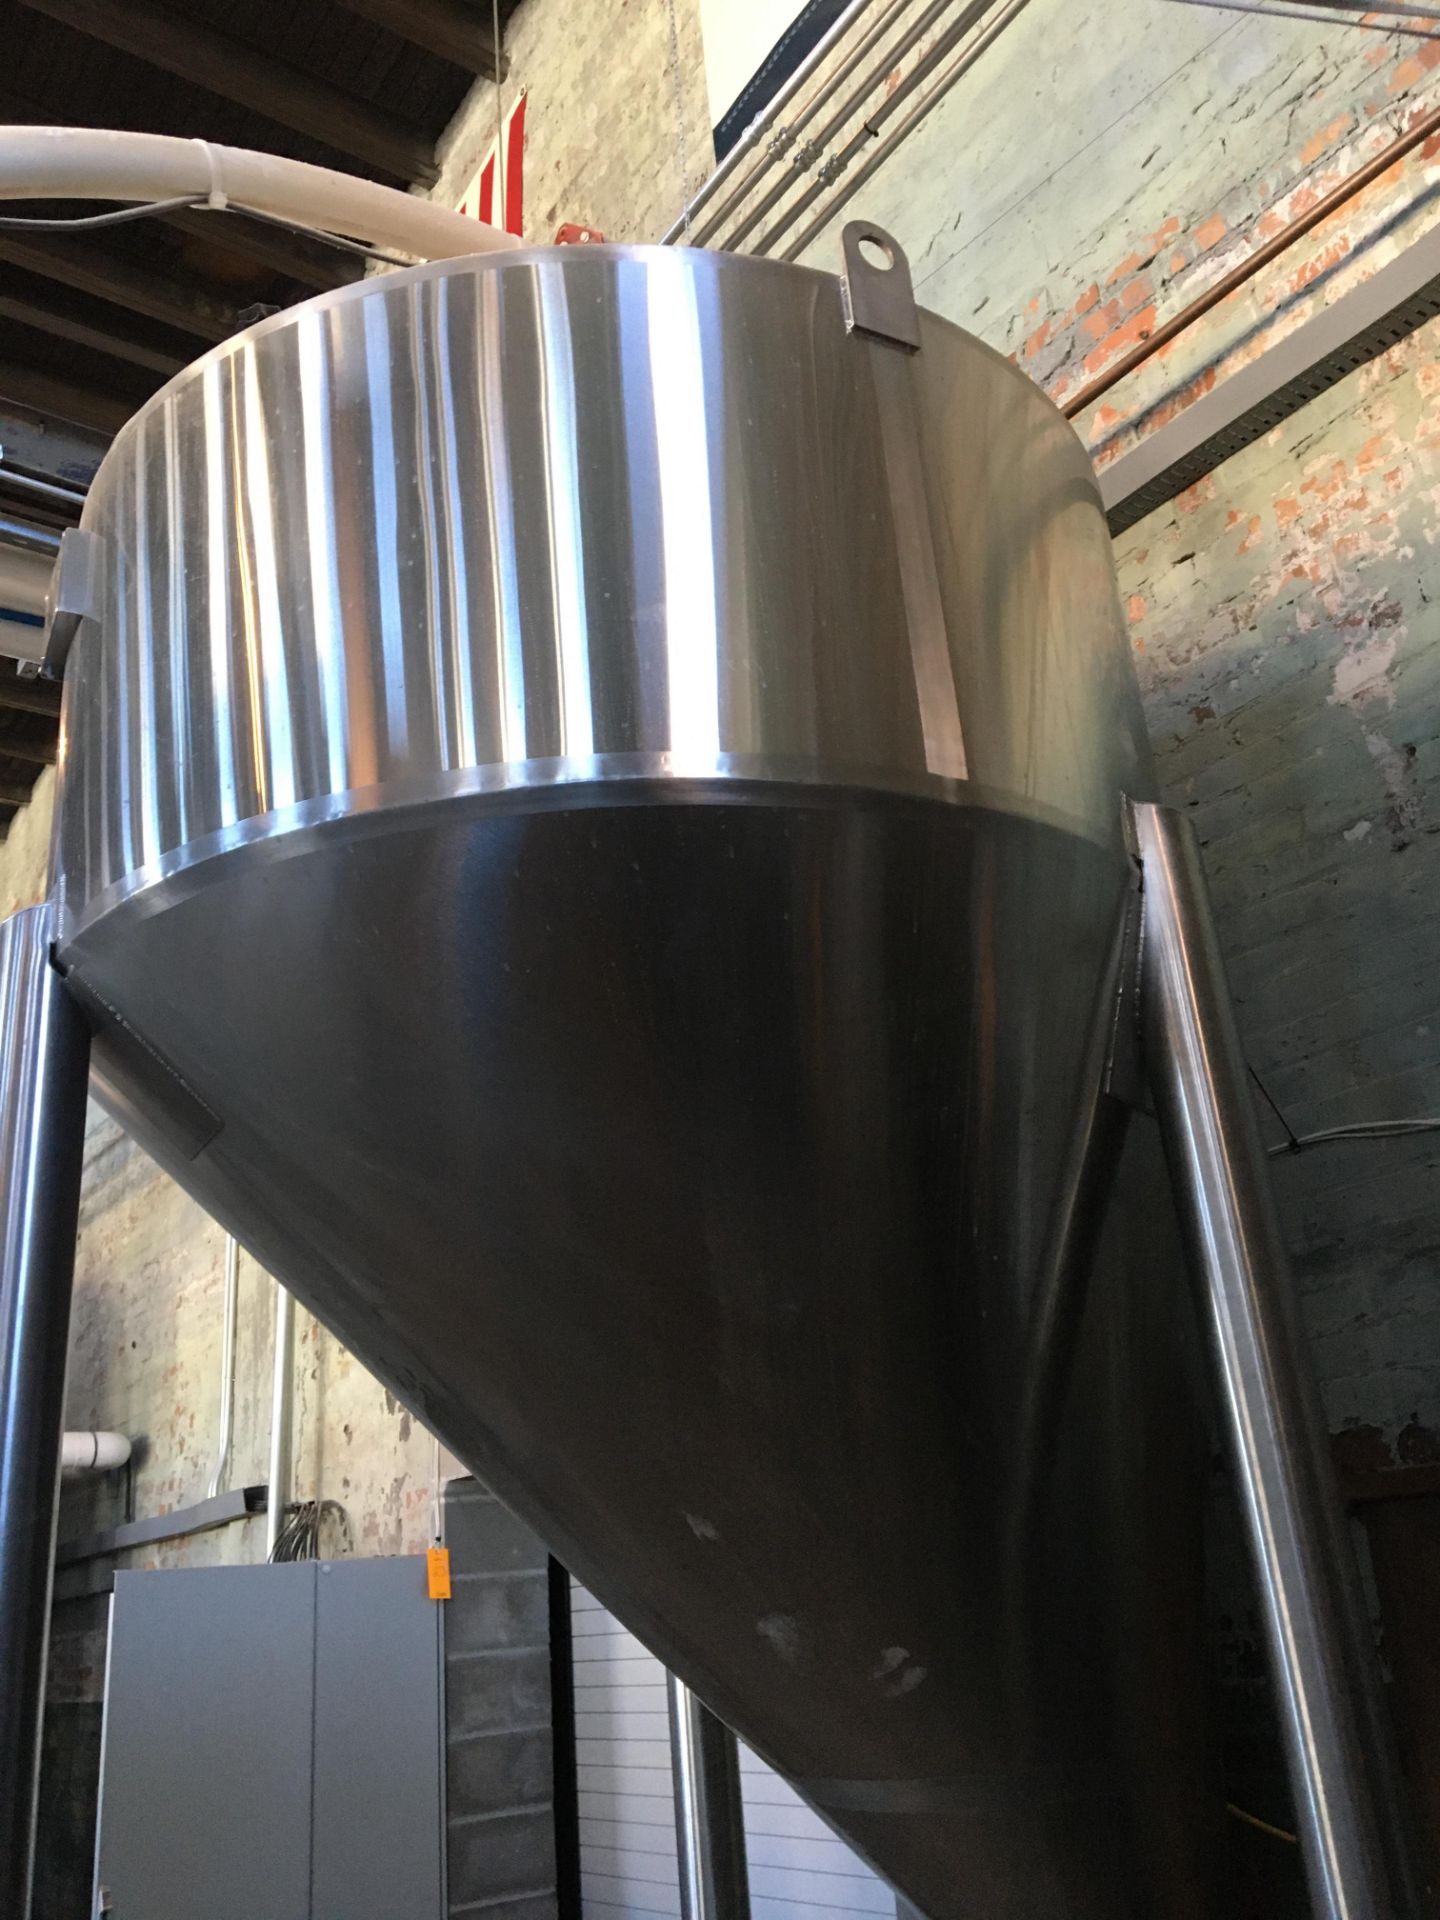 2500-L Minnetonka Grain Case, Stainless Steel; Vessel that holds all your milled grain prior to - Image 4 of 8